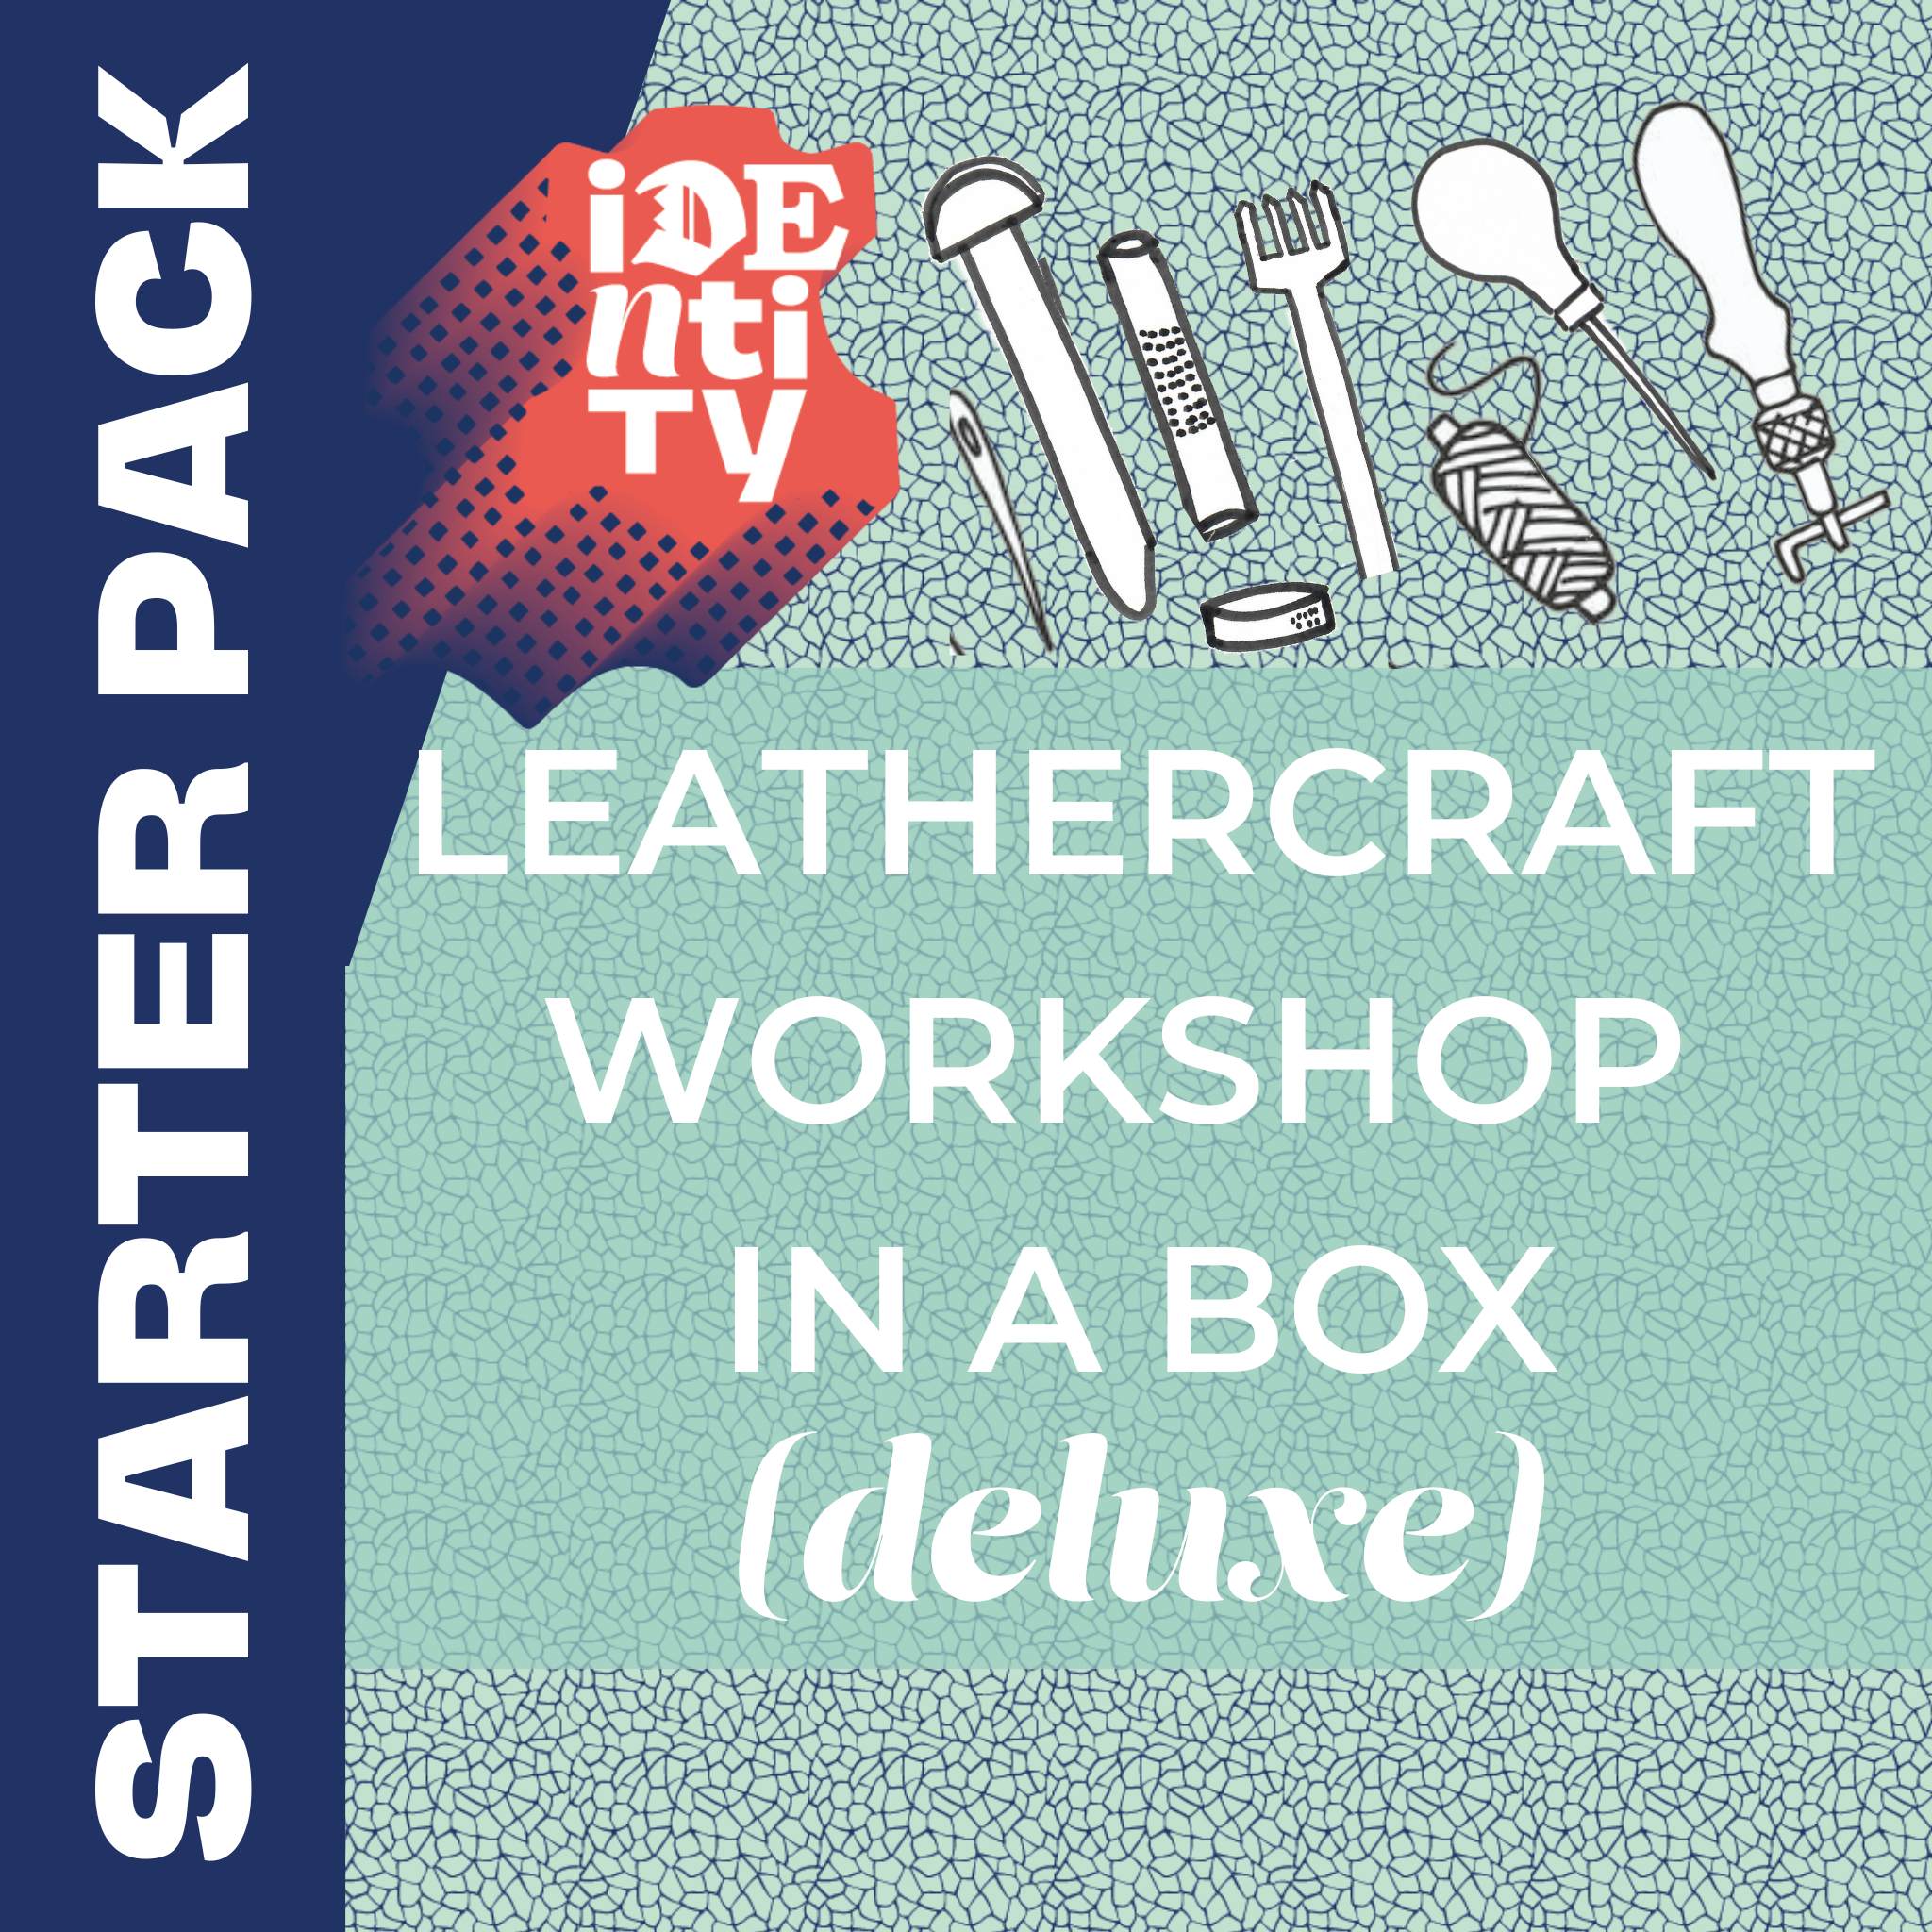 A comprehensive starter tool set for general leathercraft - tools, leathers, dye, instructional guides and templates.  The Identity Store ‘Workshop in a Box’ has been put together to give you the tools you need to start making things from leather.  The pack includes several pieces of leather and templates for good starter leather projects as well as some guide notes to help you learn to edge, stitch and set rivets and press studs.